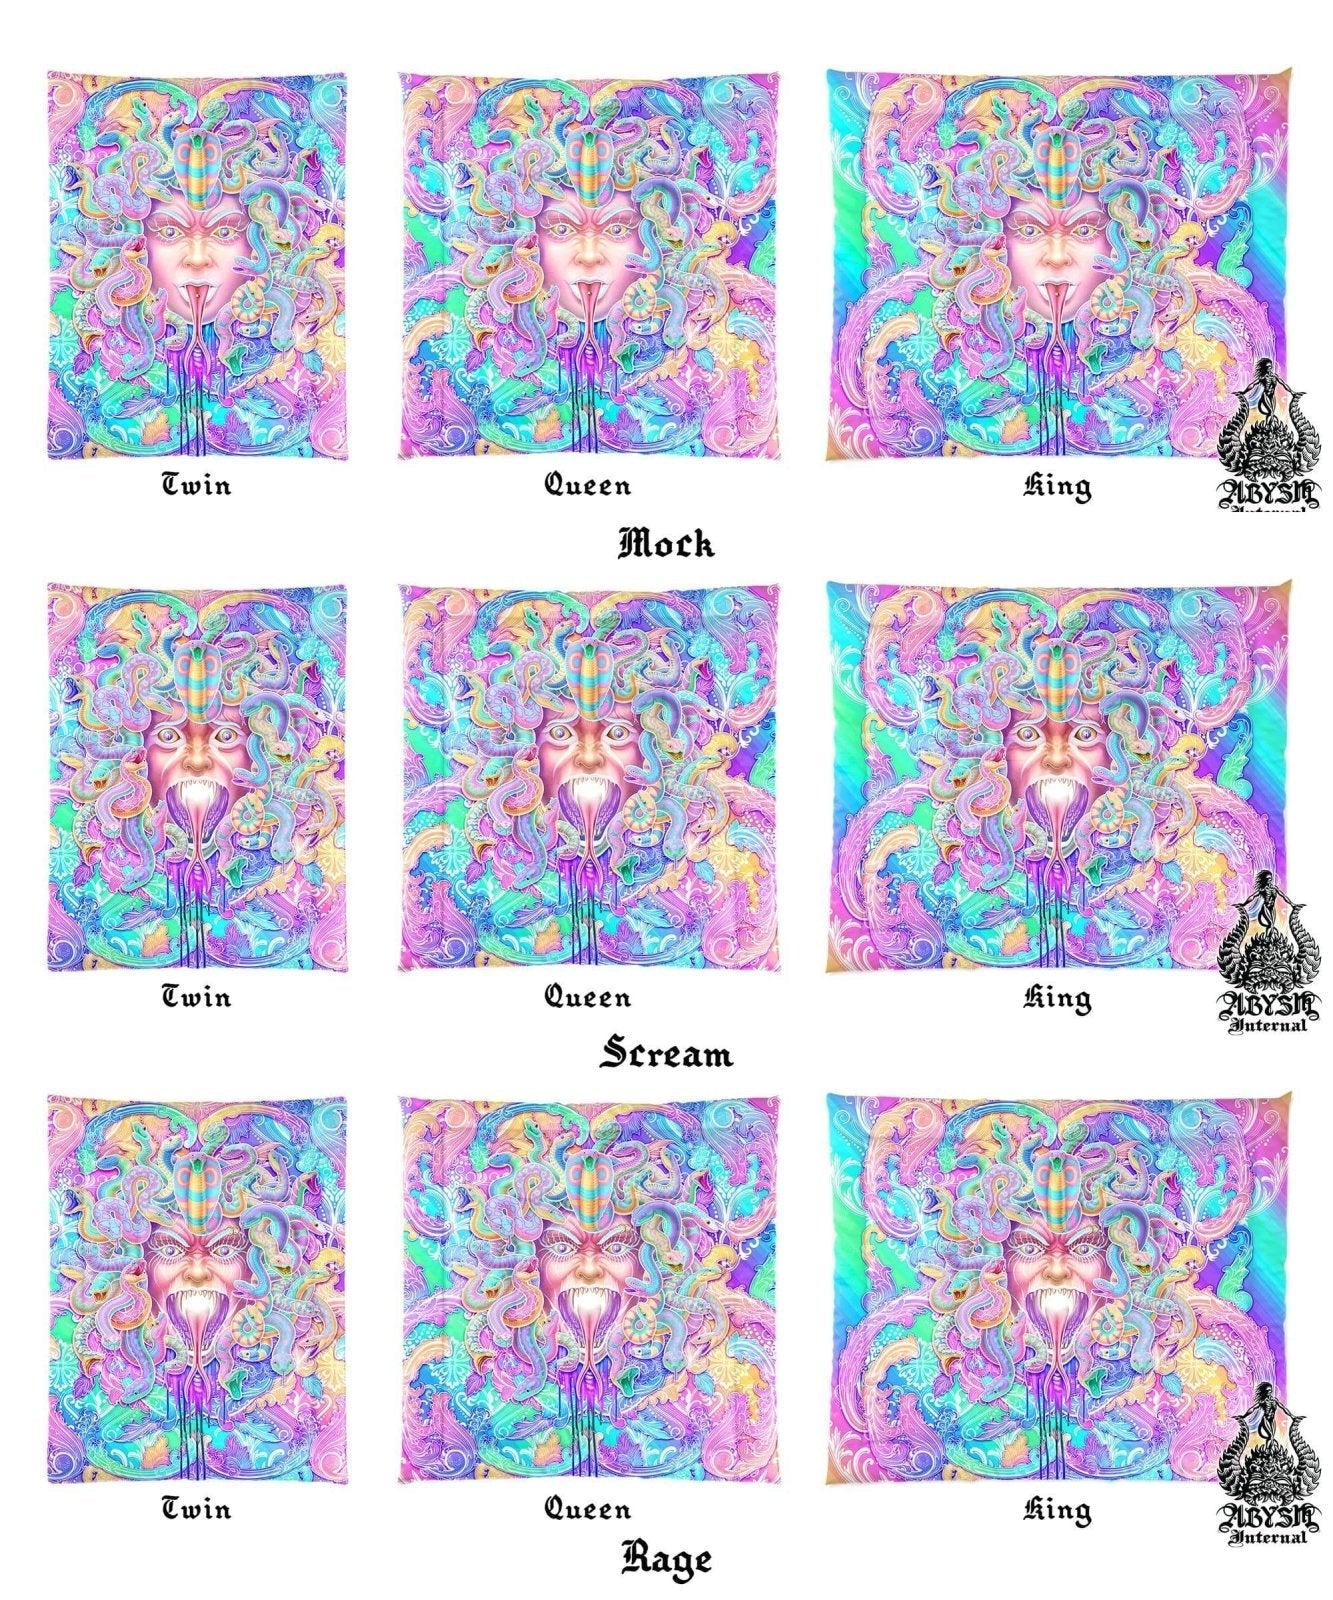 Aesthetic Bedding Set, Comforter and Duvet, Psychedelic Medusa, Pastel Bed Cover, Kawaii Gamer Bedroom Decor, Indie Room, King, Queen and Twin Size - 3 Faces - Abysm Internal